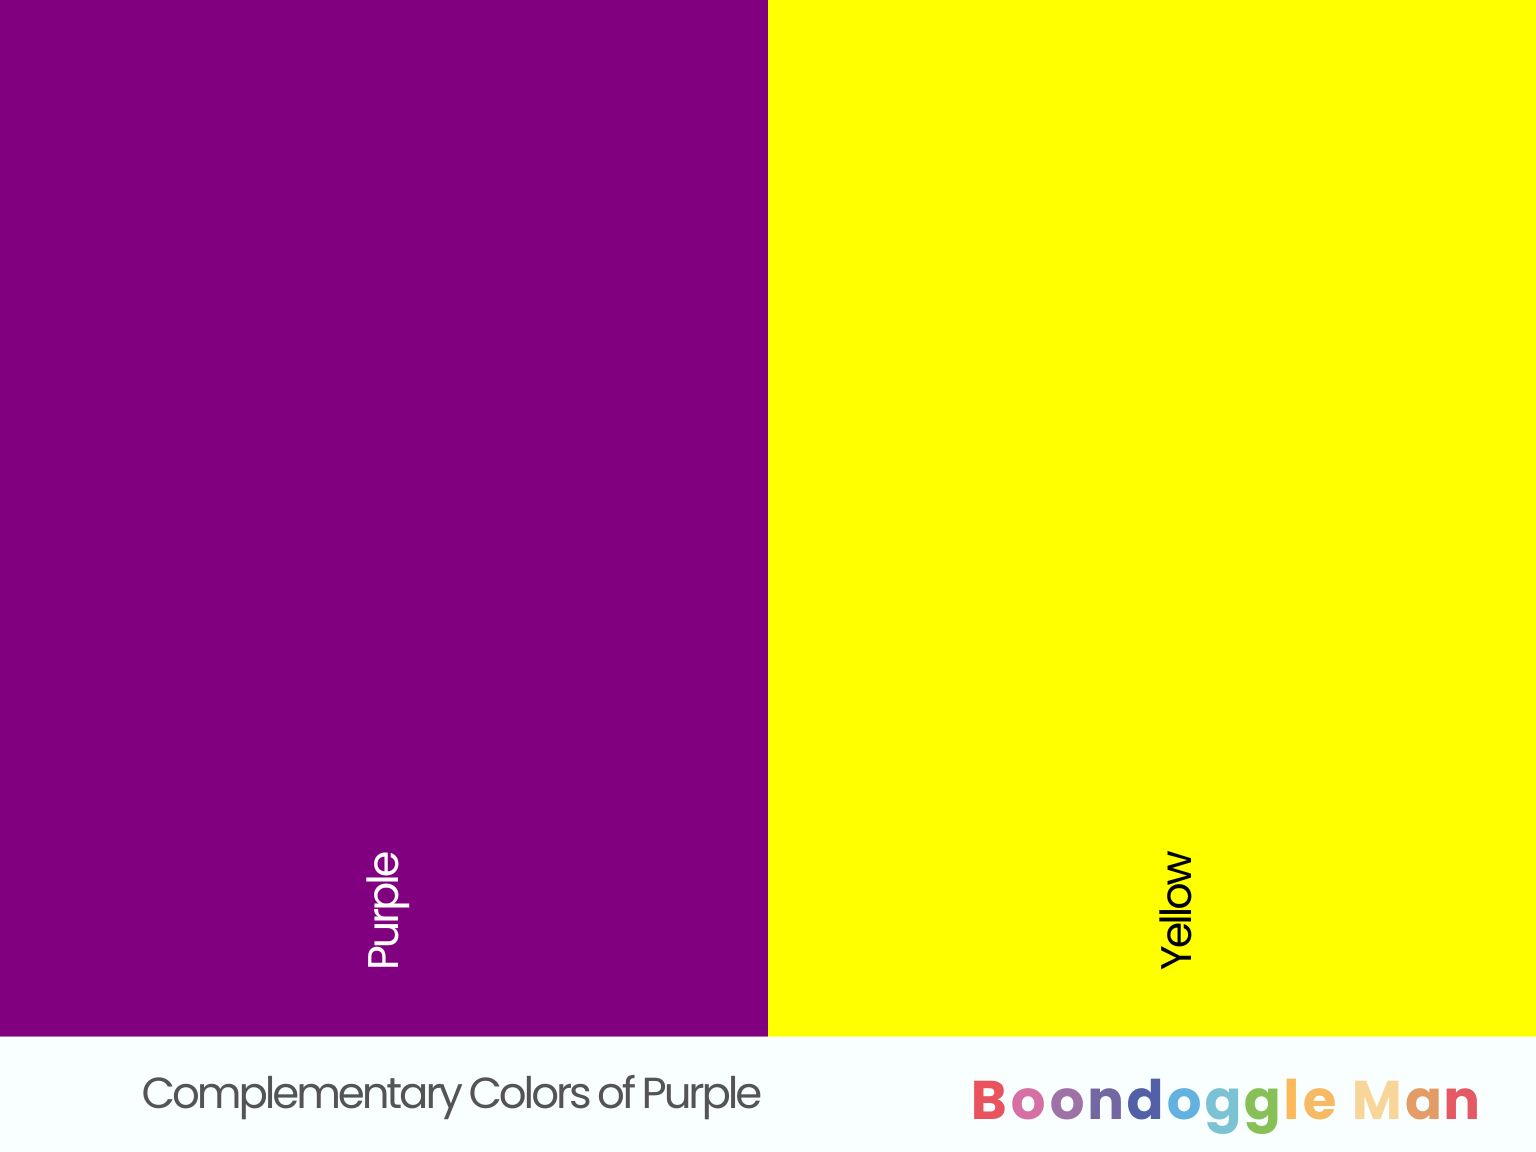 Complementary Colors of Purple